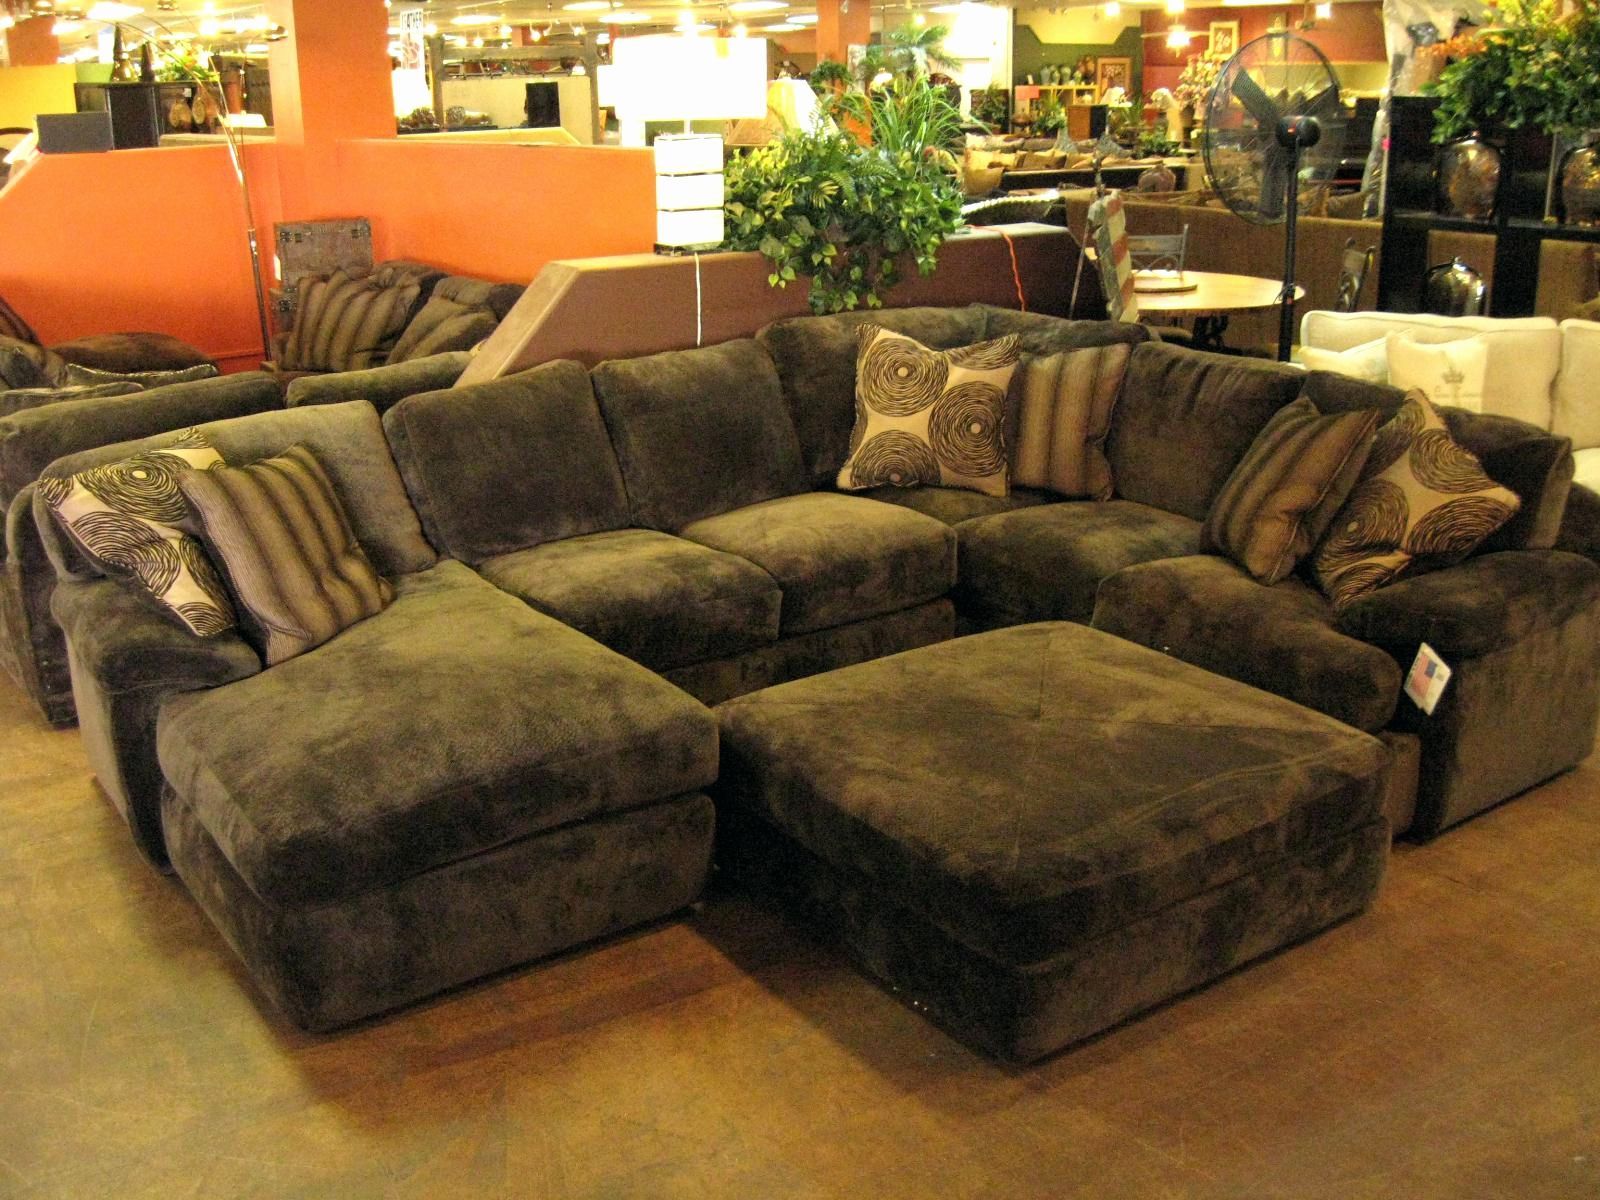 Idea Leather Sectional Sofas With Chaise Photos Leather In Large Sofa Chairs (View 7 of 15)